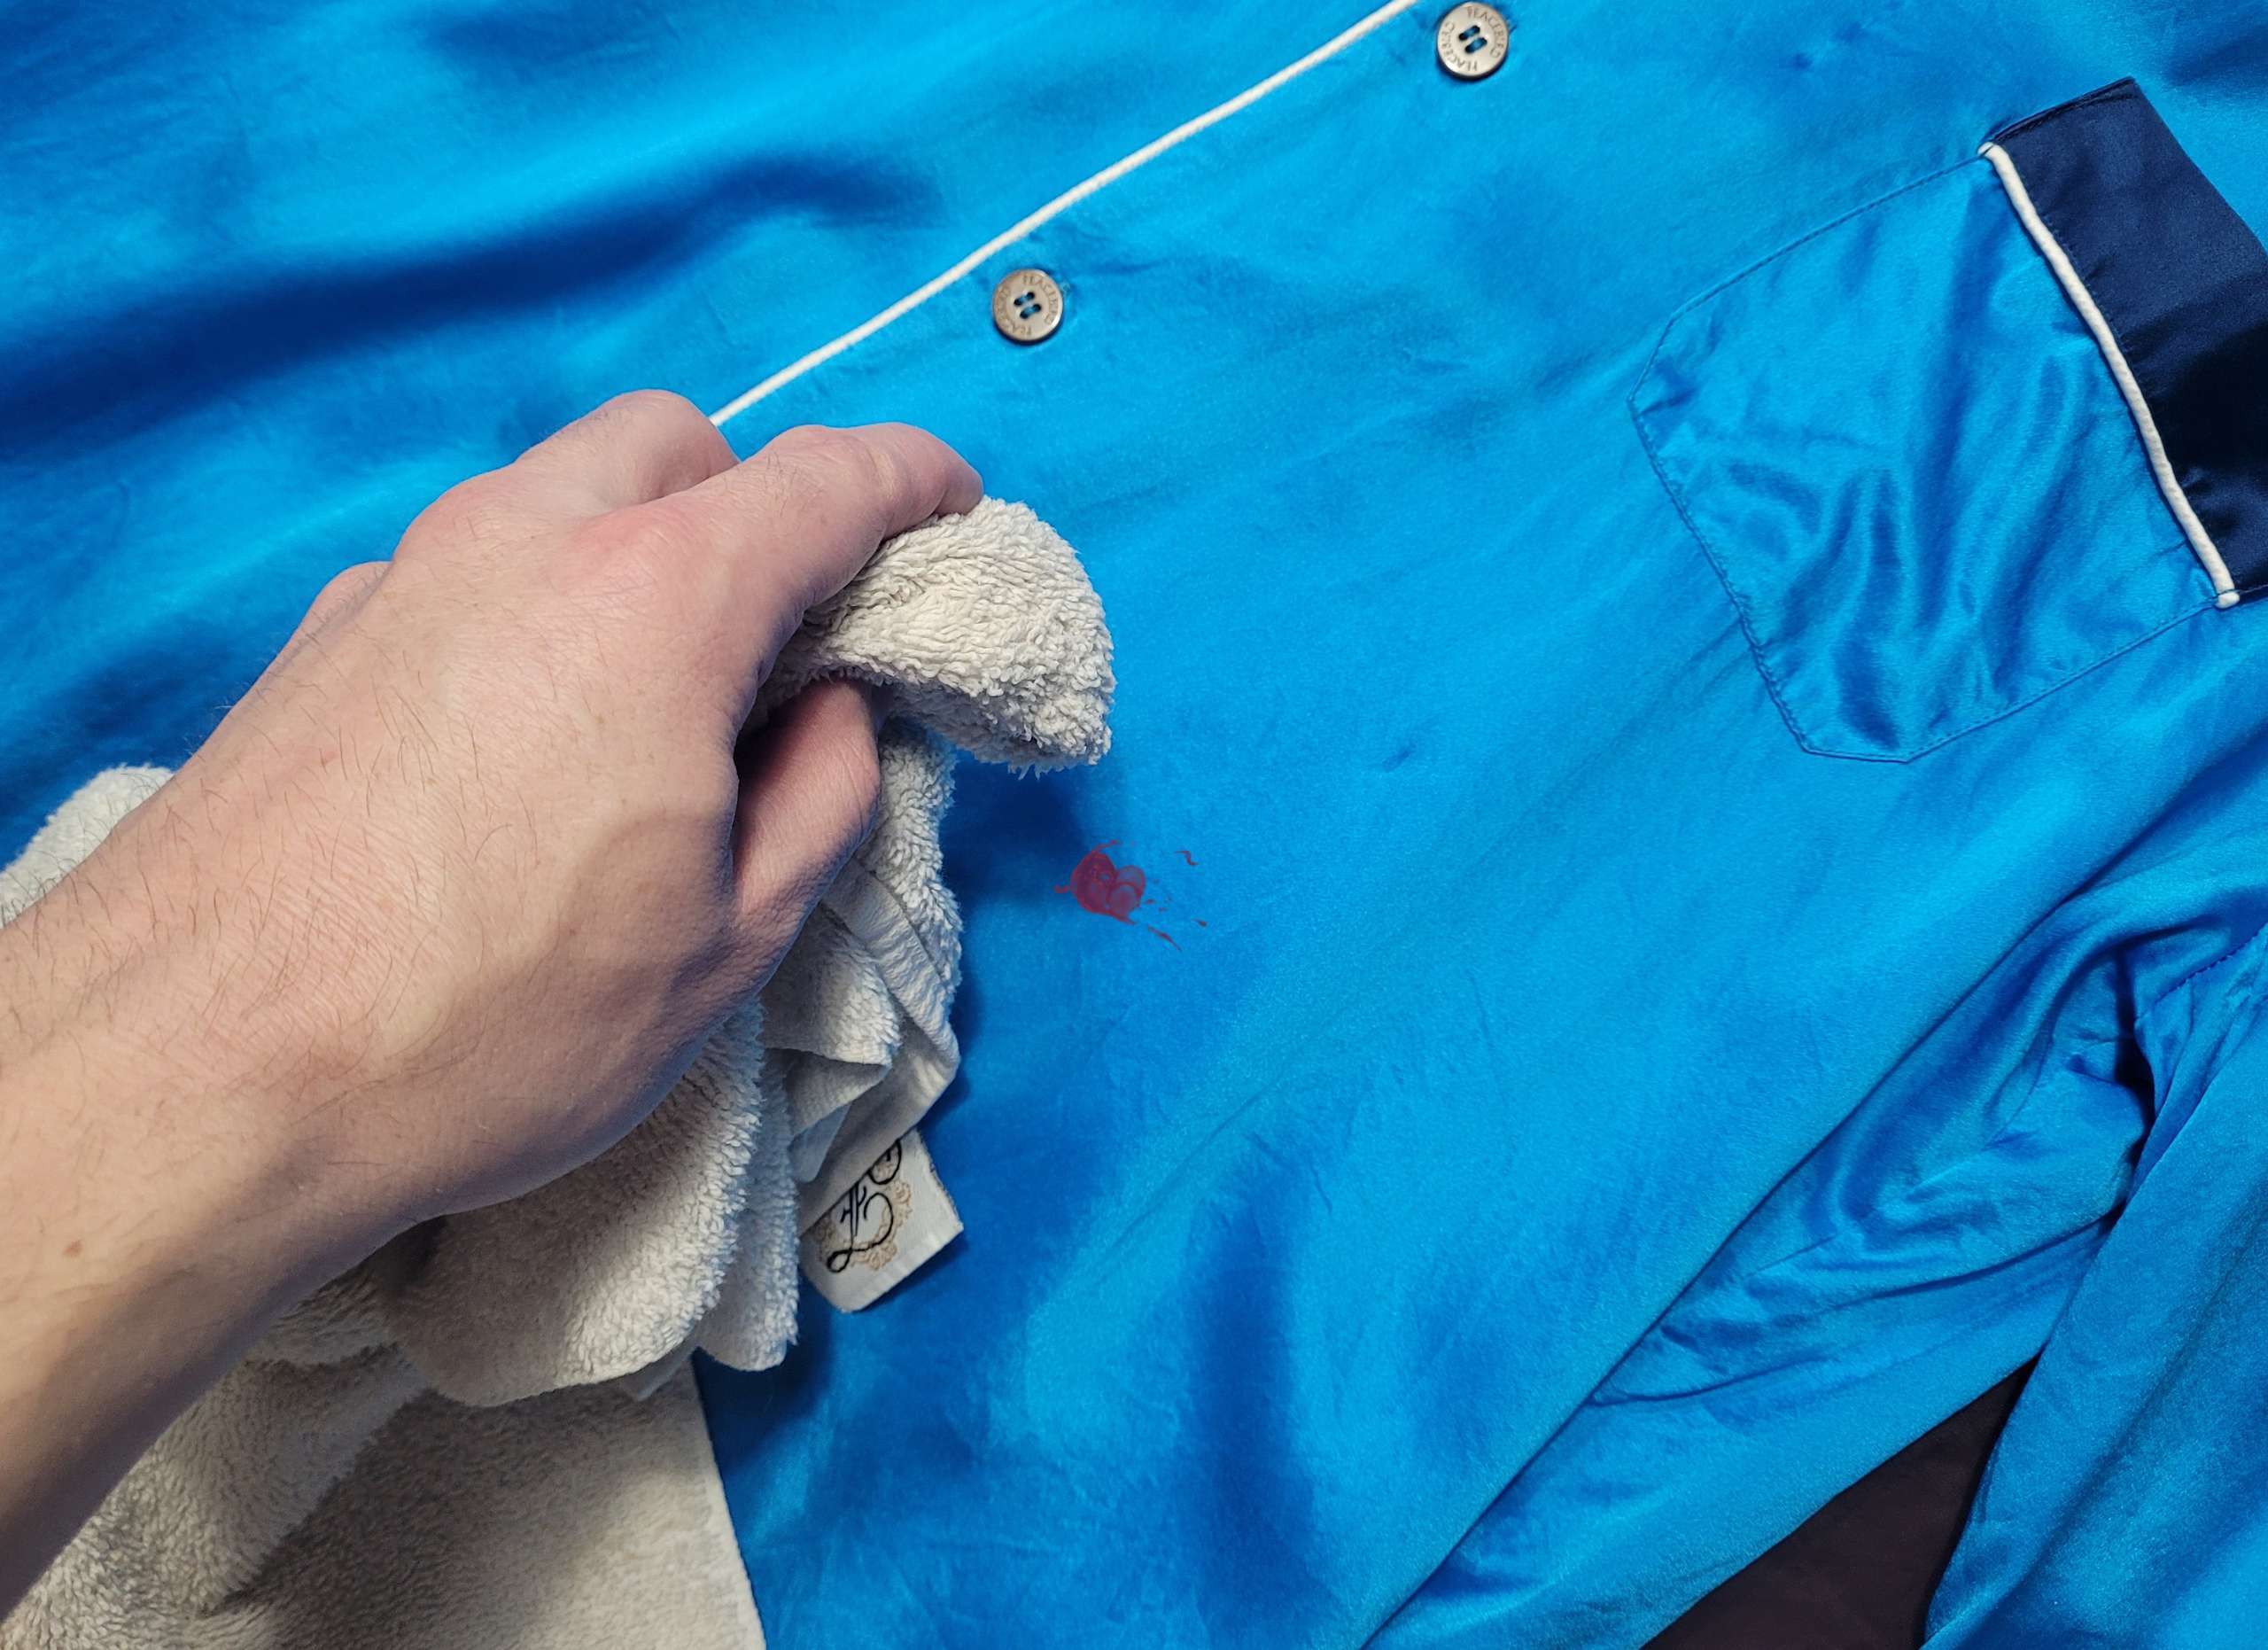 photo of a person using a cloth to dab a stain off of a satin pajama shirt